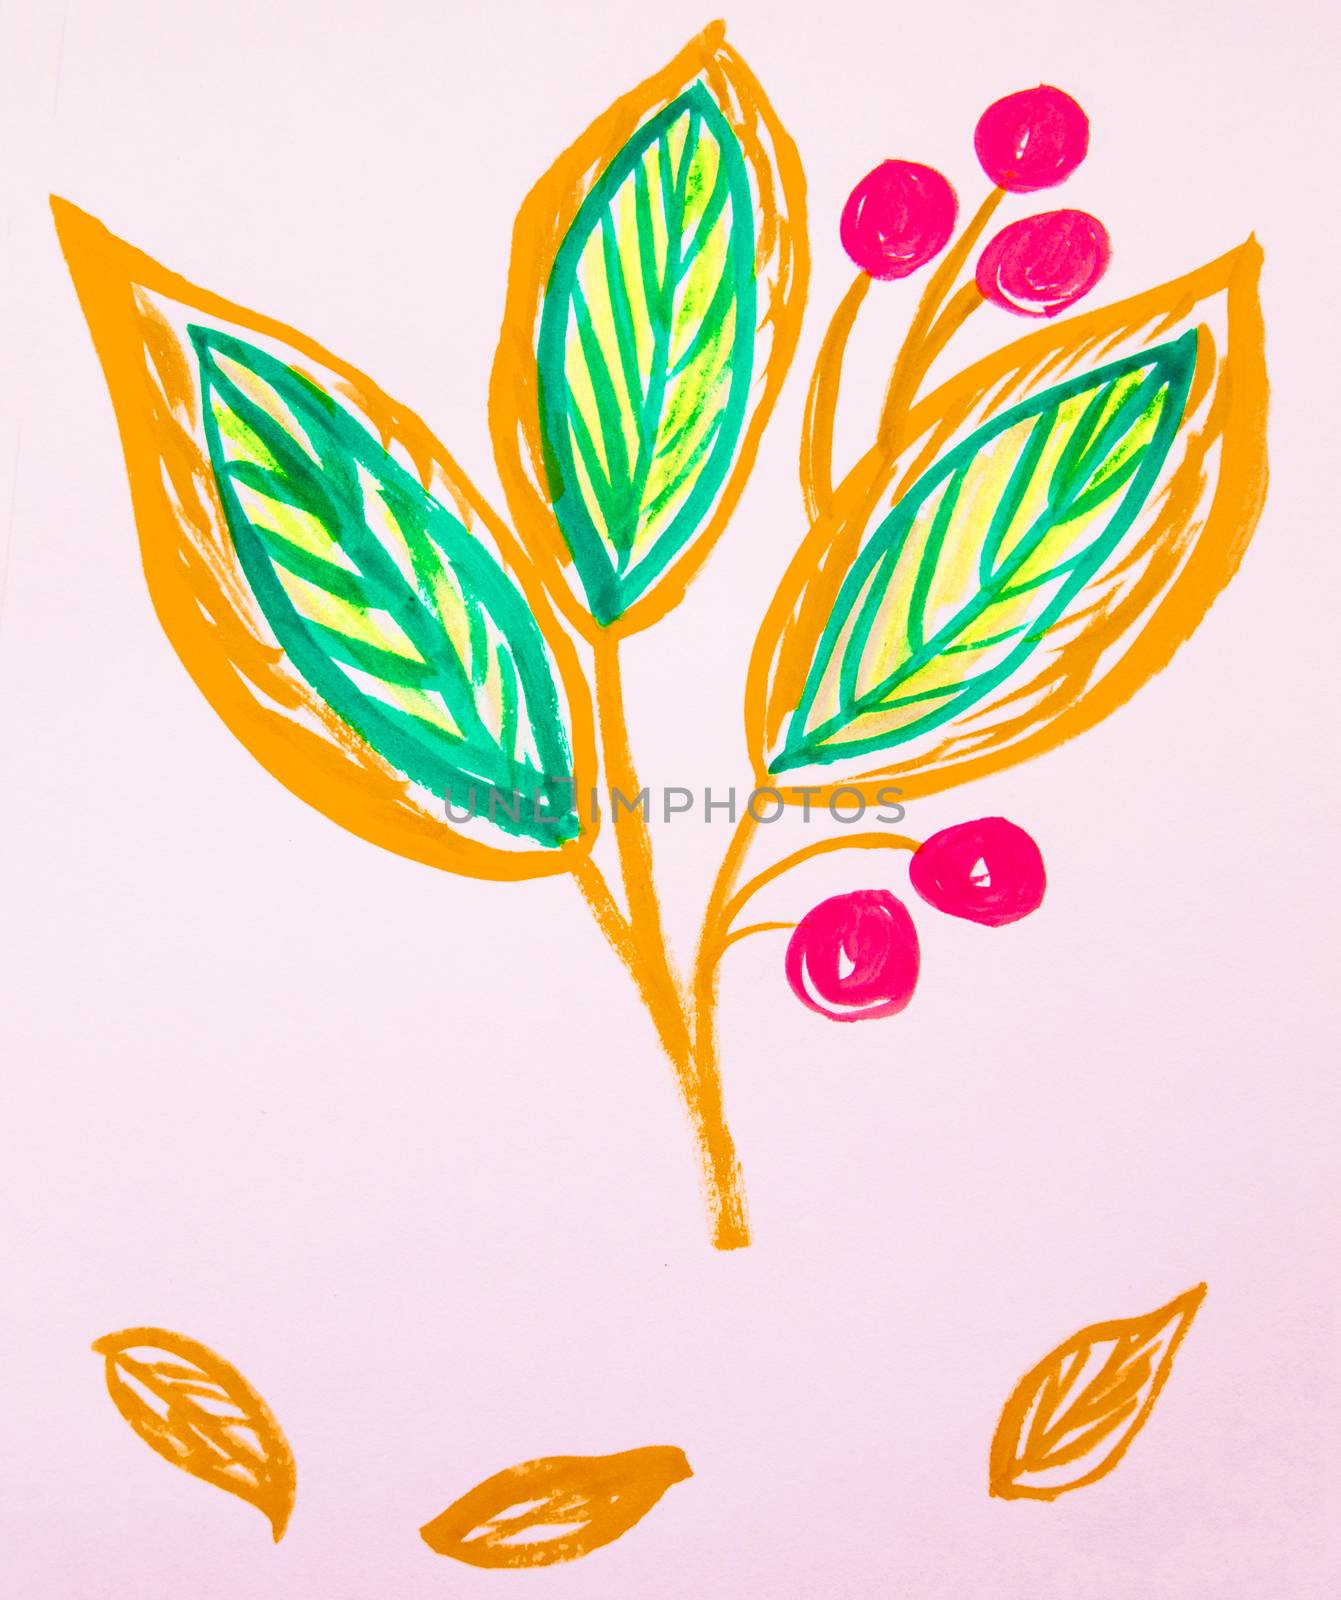 Cute hand-Drawn watercolor flower stem with leaves and berries. Orange and green, spring flowers, Botanical garden plants.